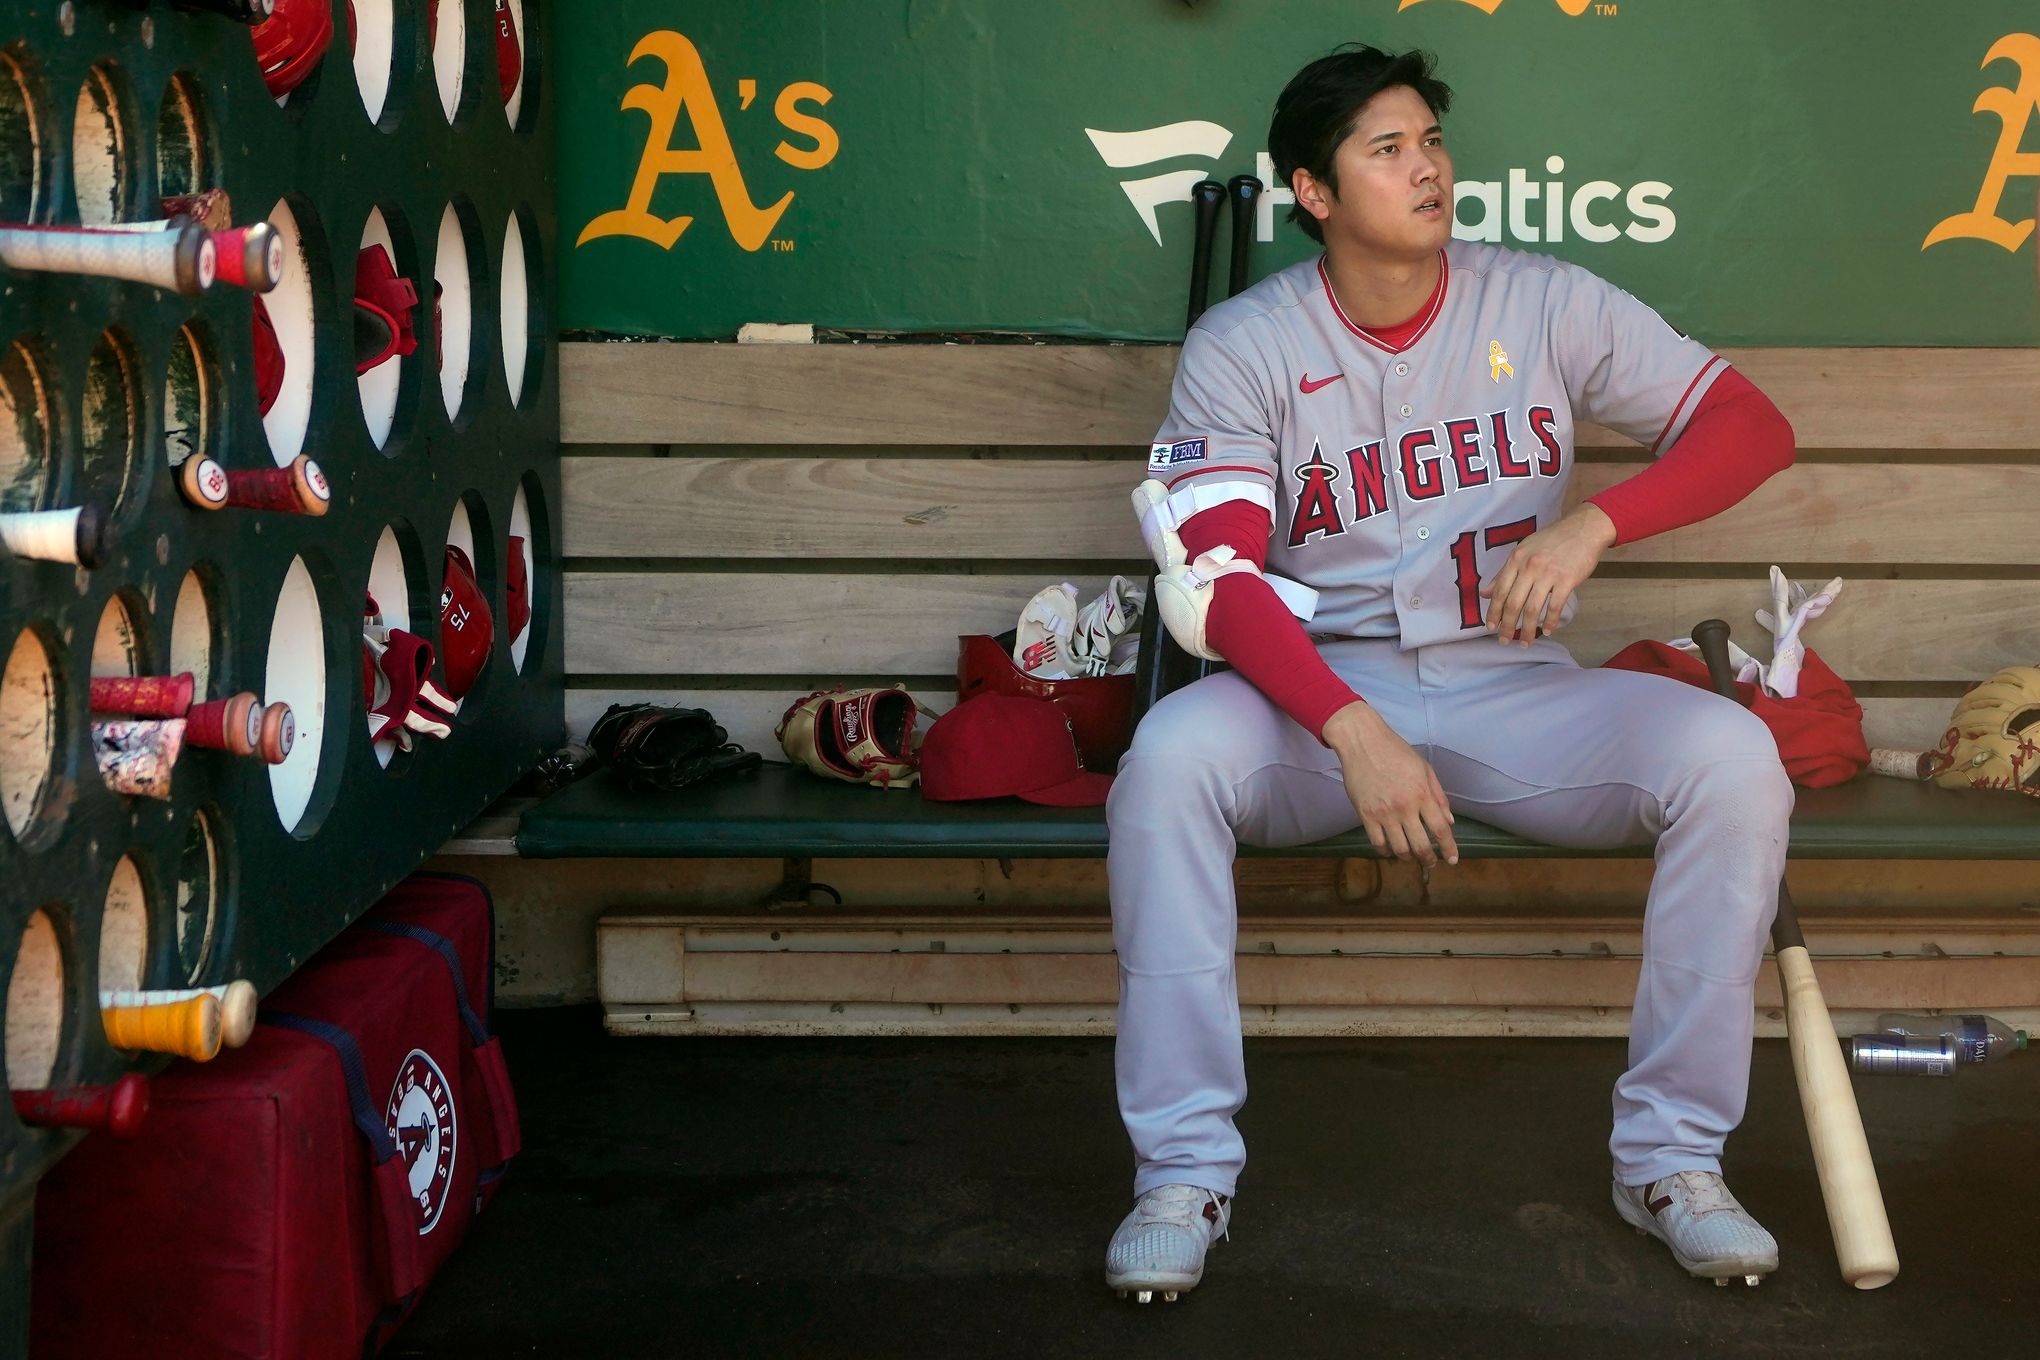 Elbow surgery 'inevitable' for Angels' Shohei Ohtani, agent says – NBC Los  Angeles